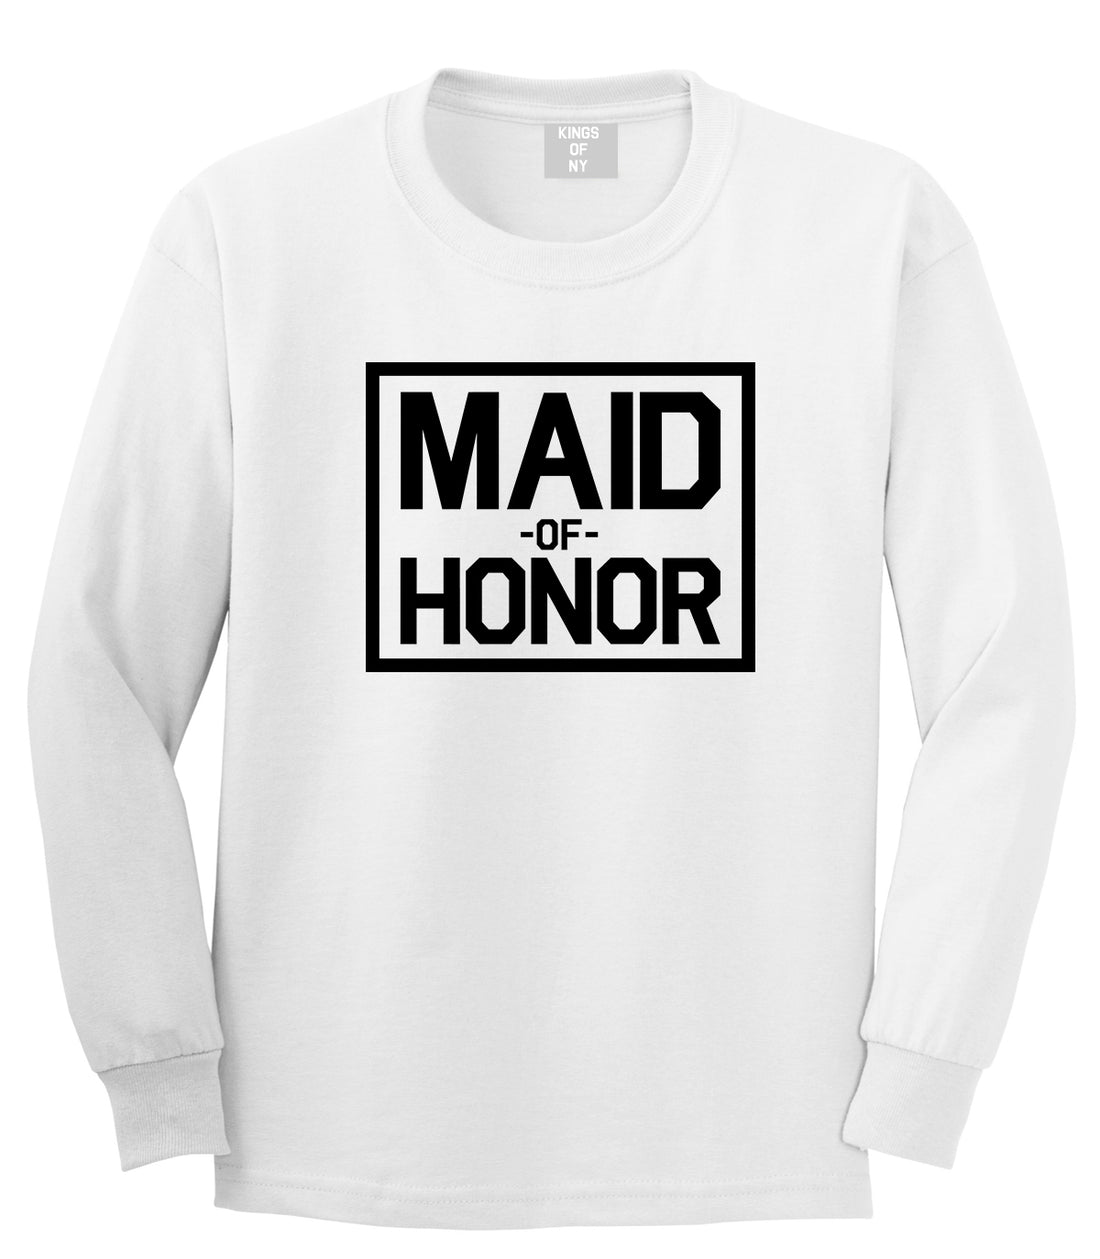 Maid Of Honor Wedding Mens White Long Sleeve T-Shirt by Kings Of NY